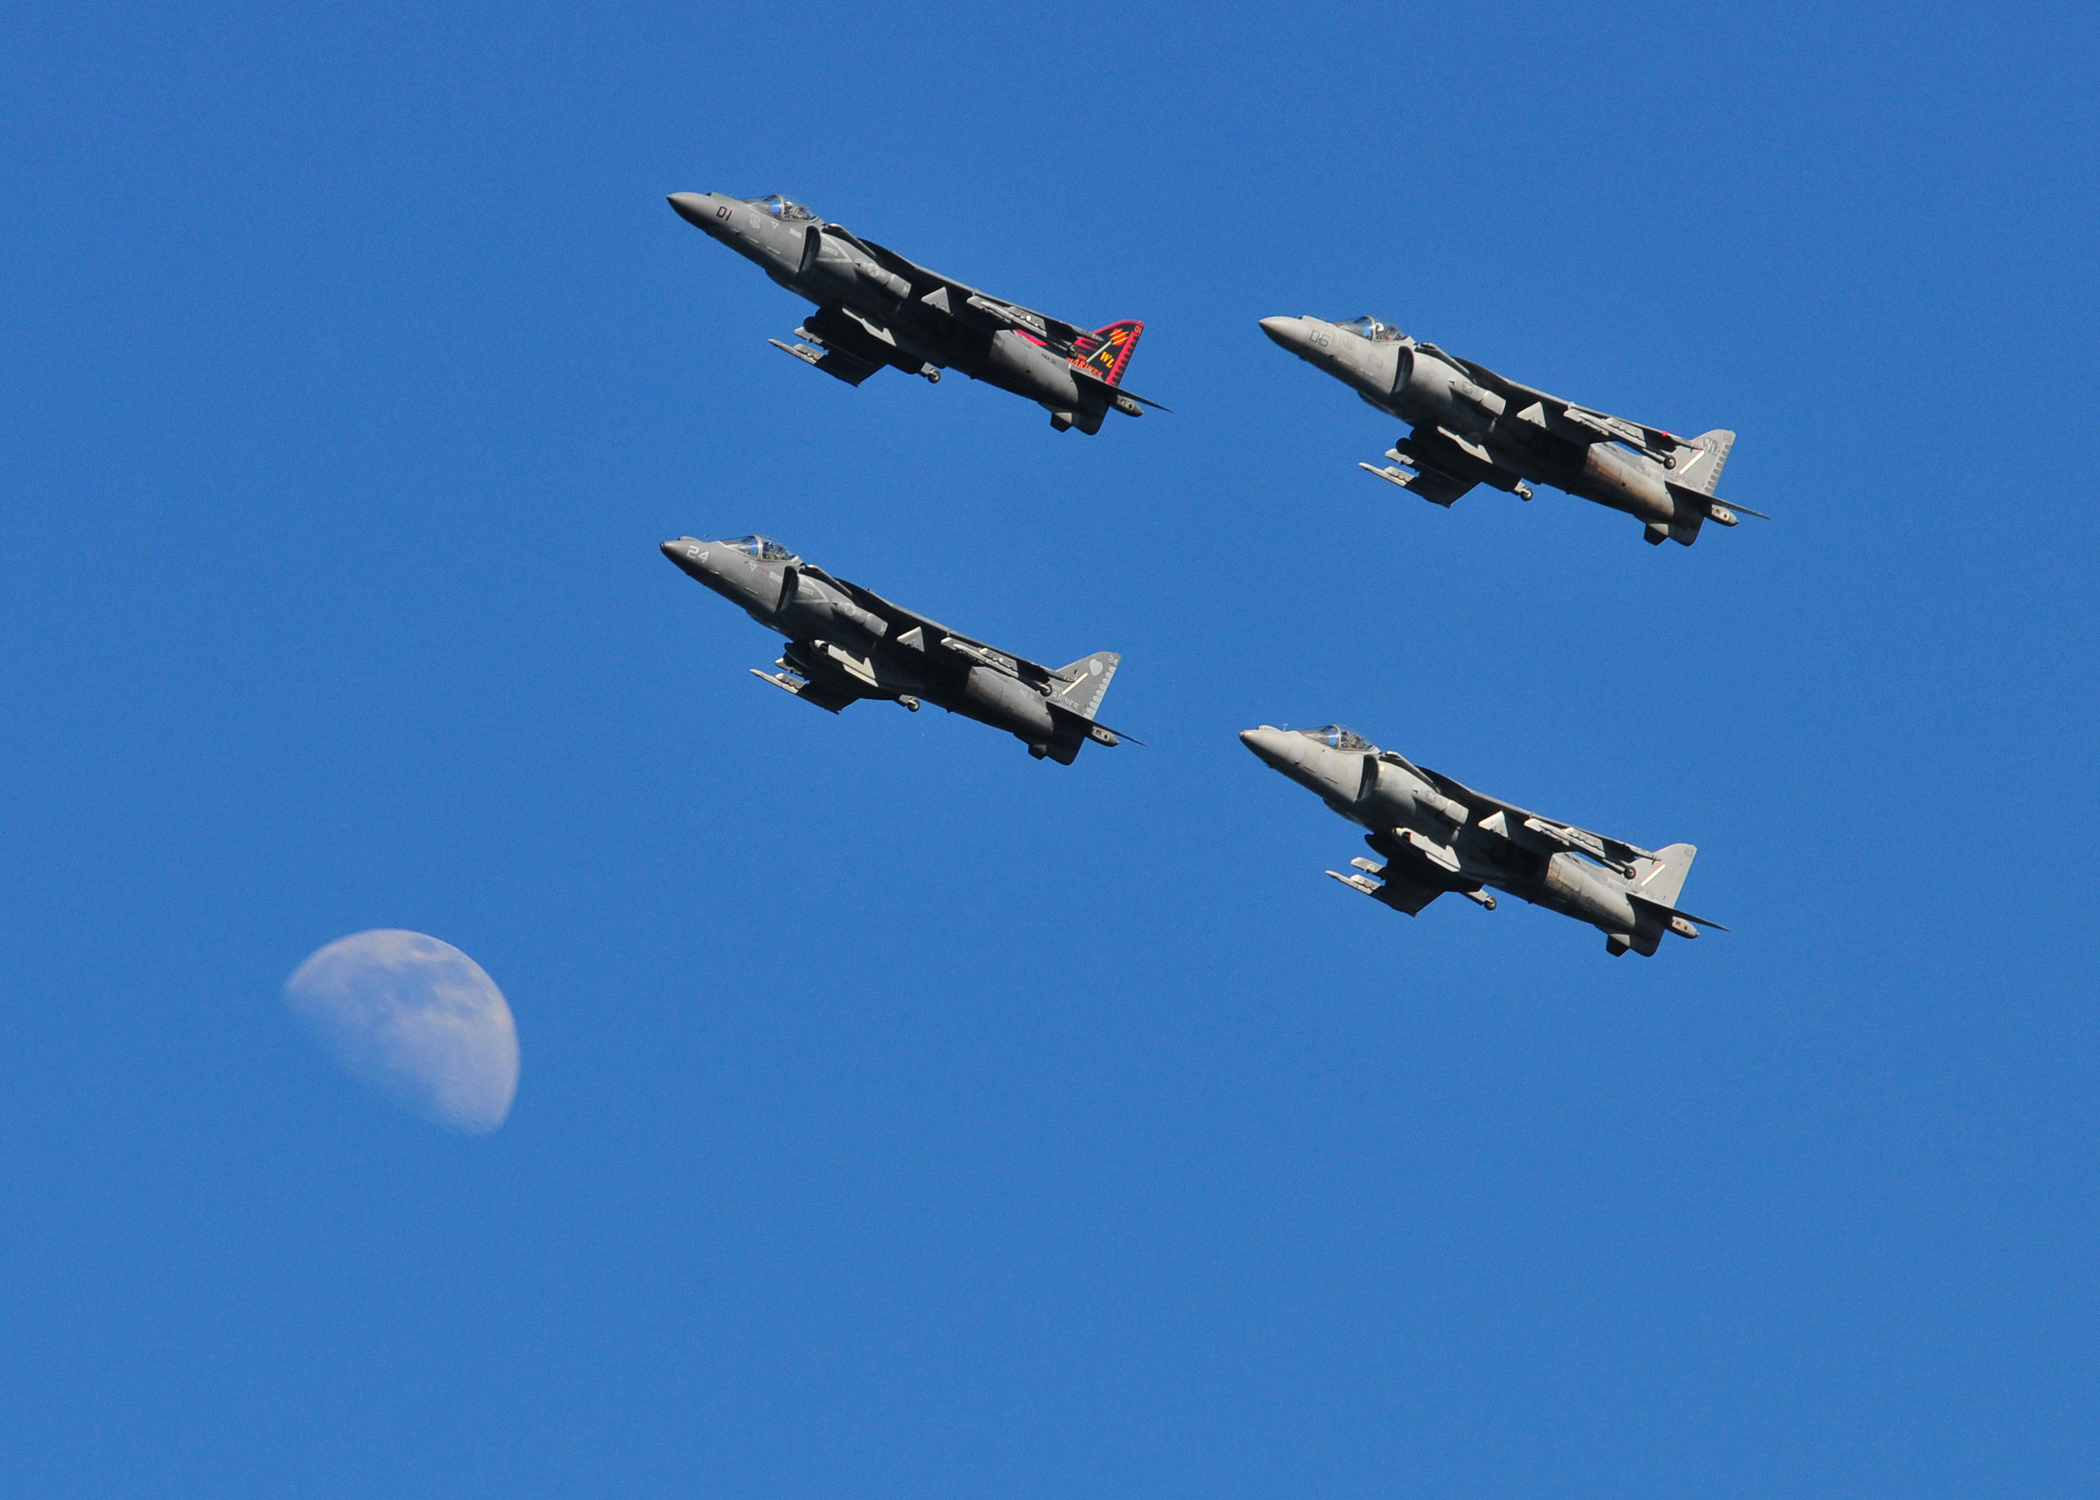 AV-8B Harriers fly by the moon over San Diego Bay by Trevor Welsh